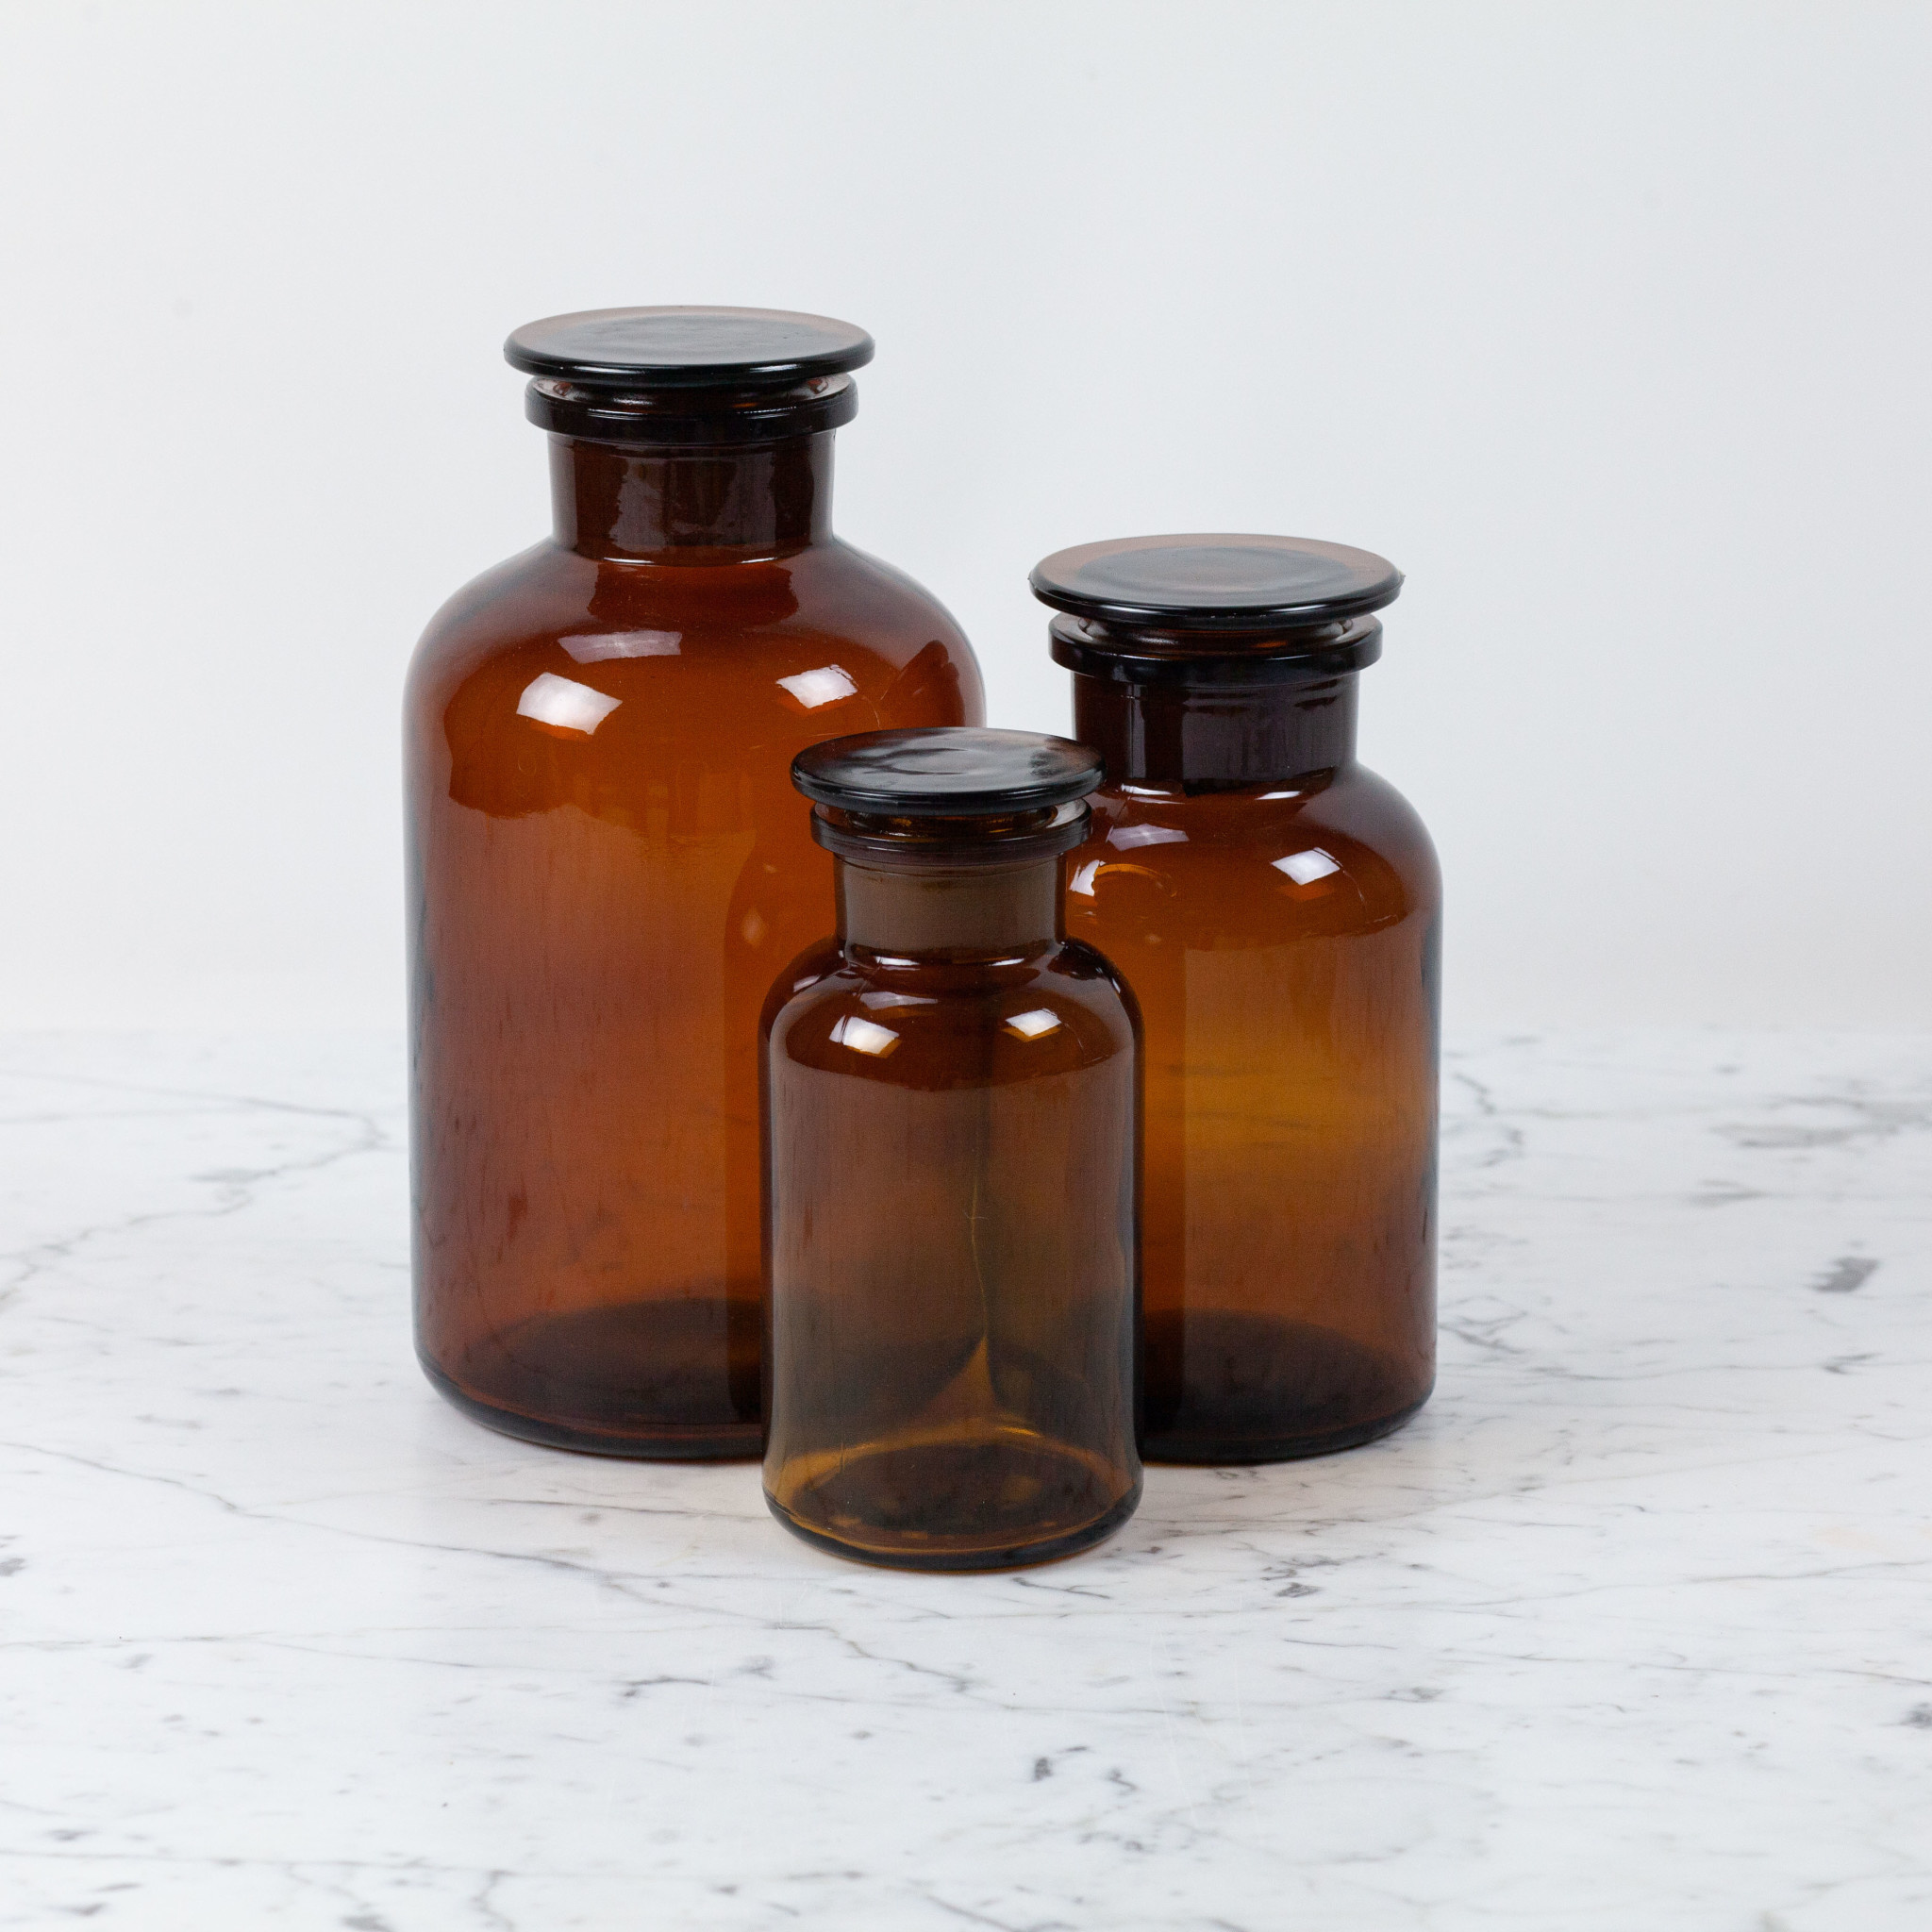 Amber Apothecary Bottle - Large - 1 Liter